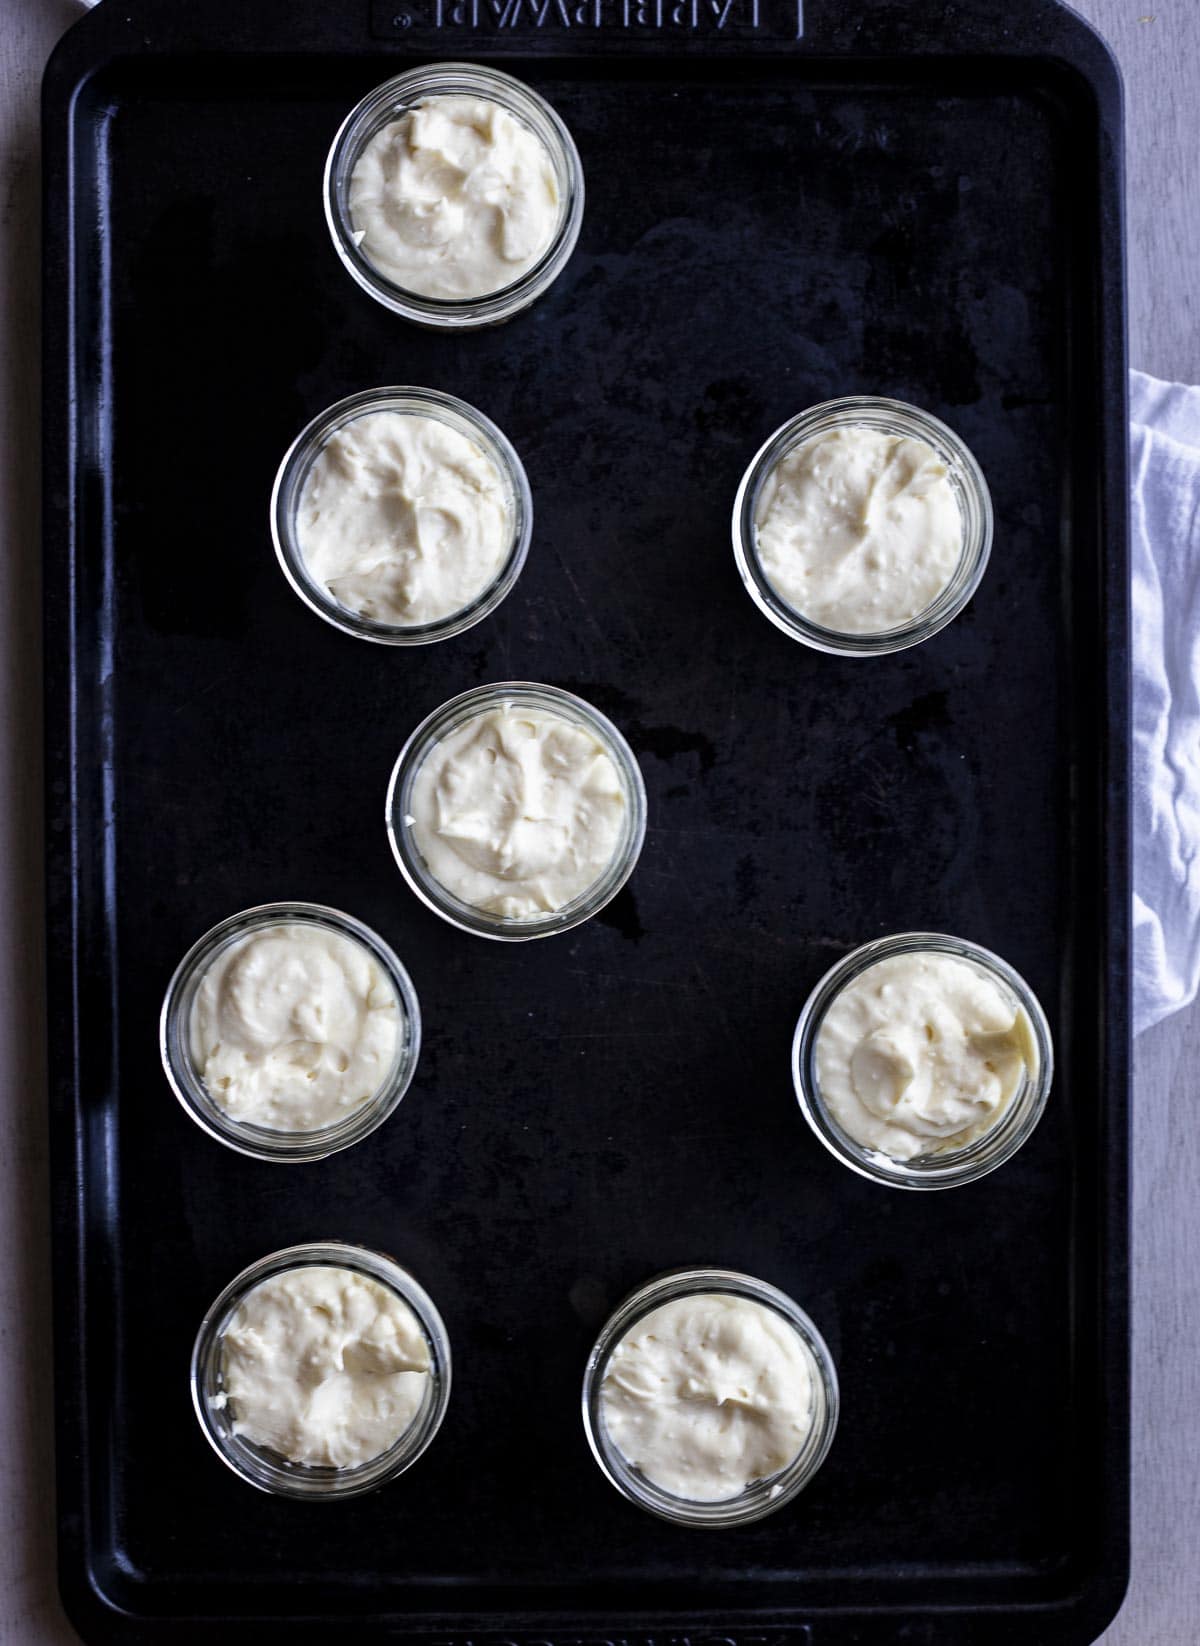 Cheesecake filling added to the jars and arranged on a baking sheet.